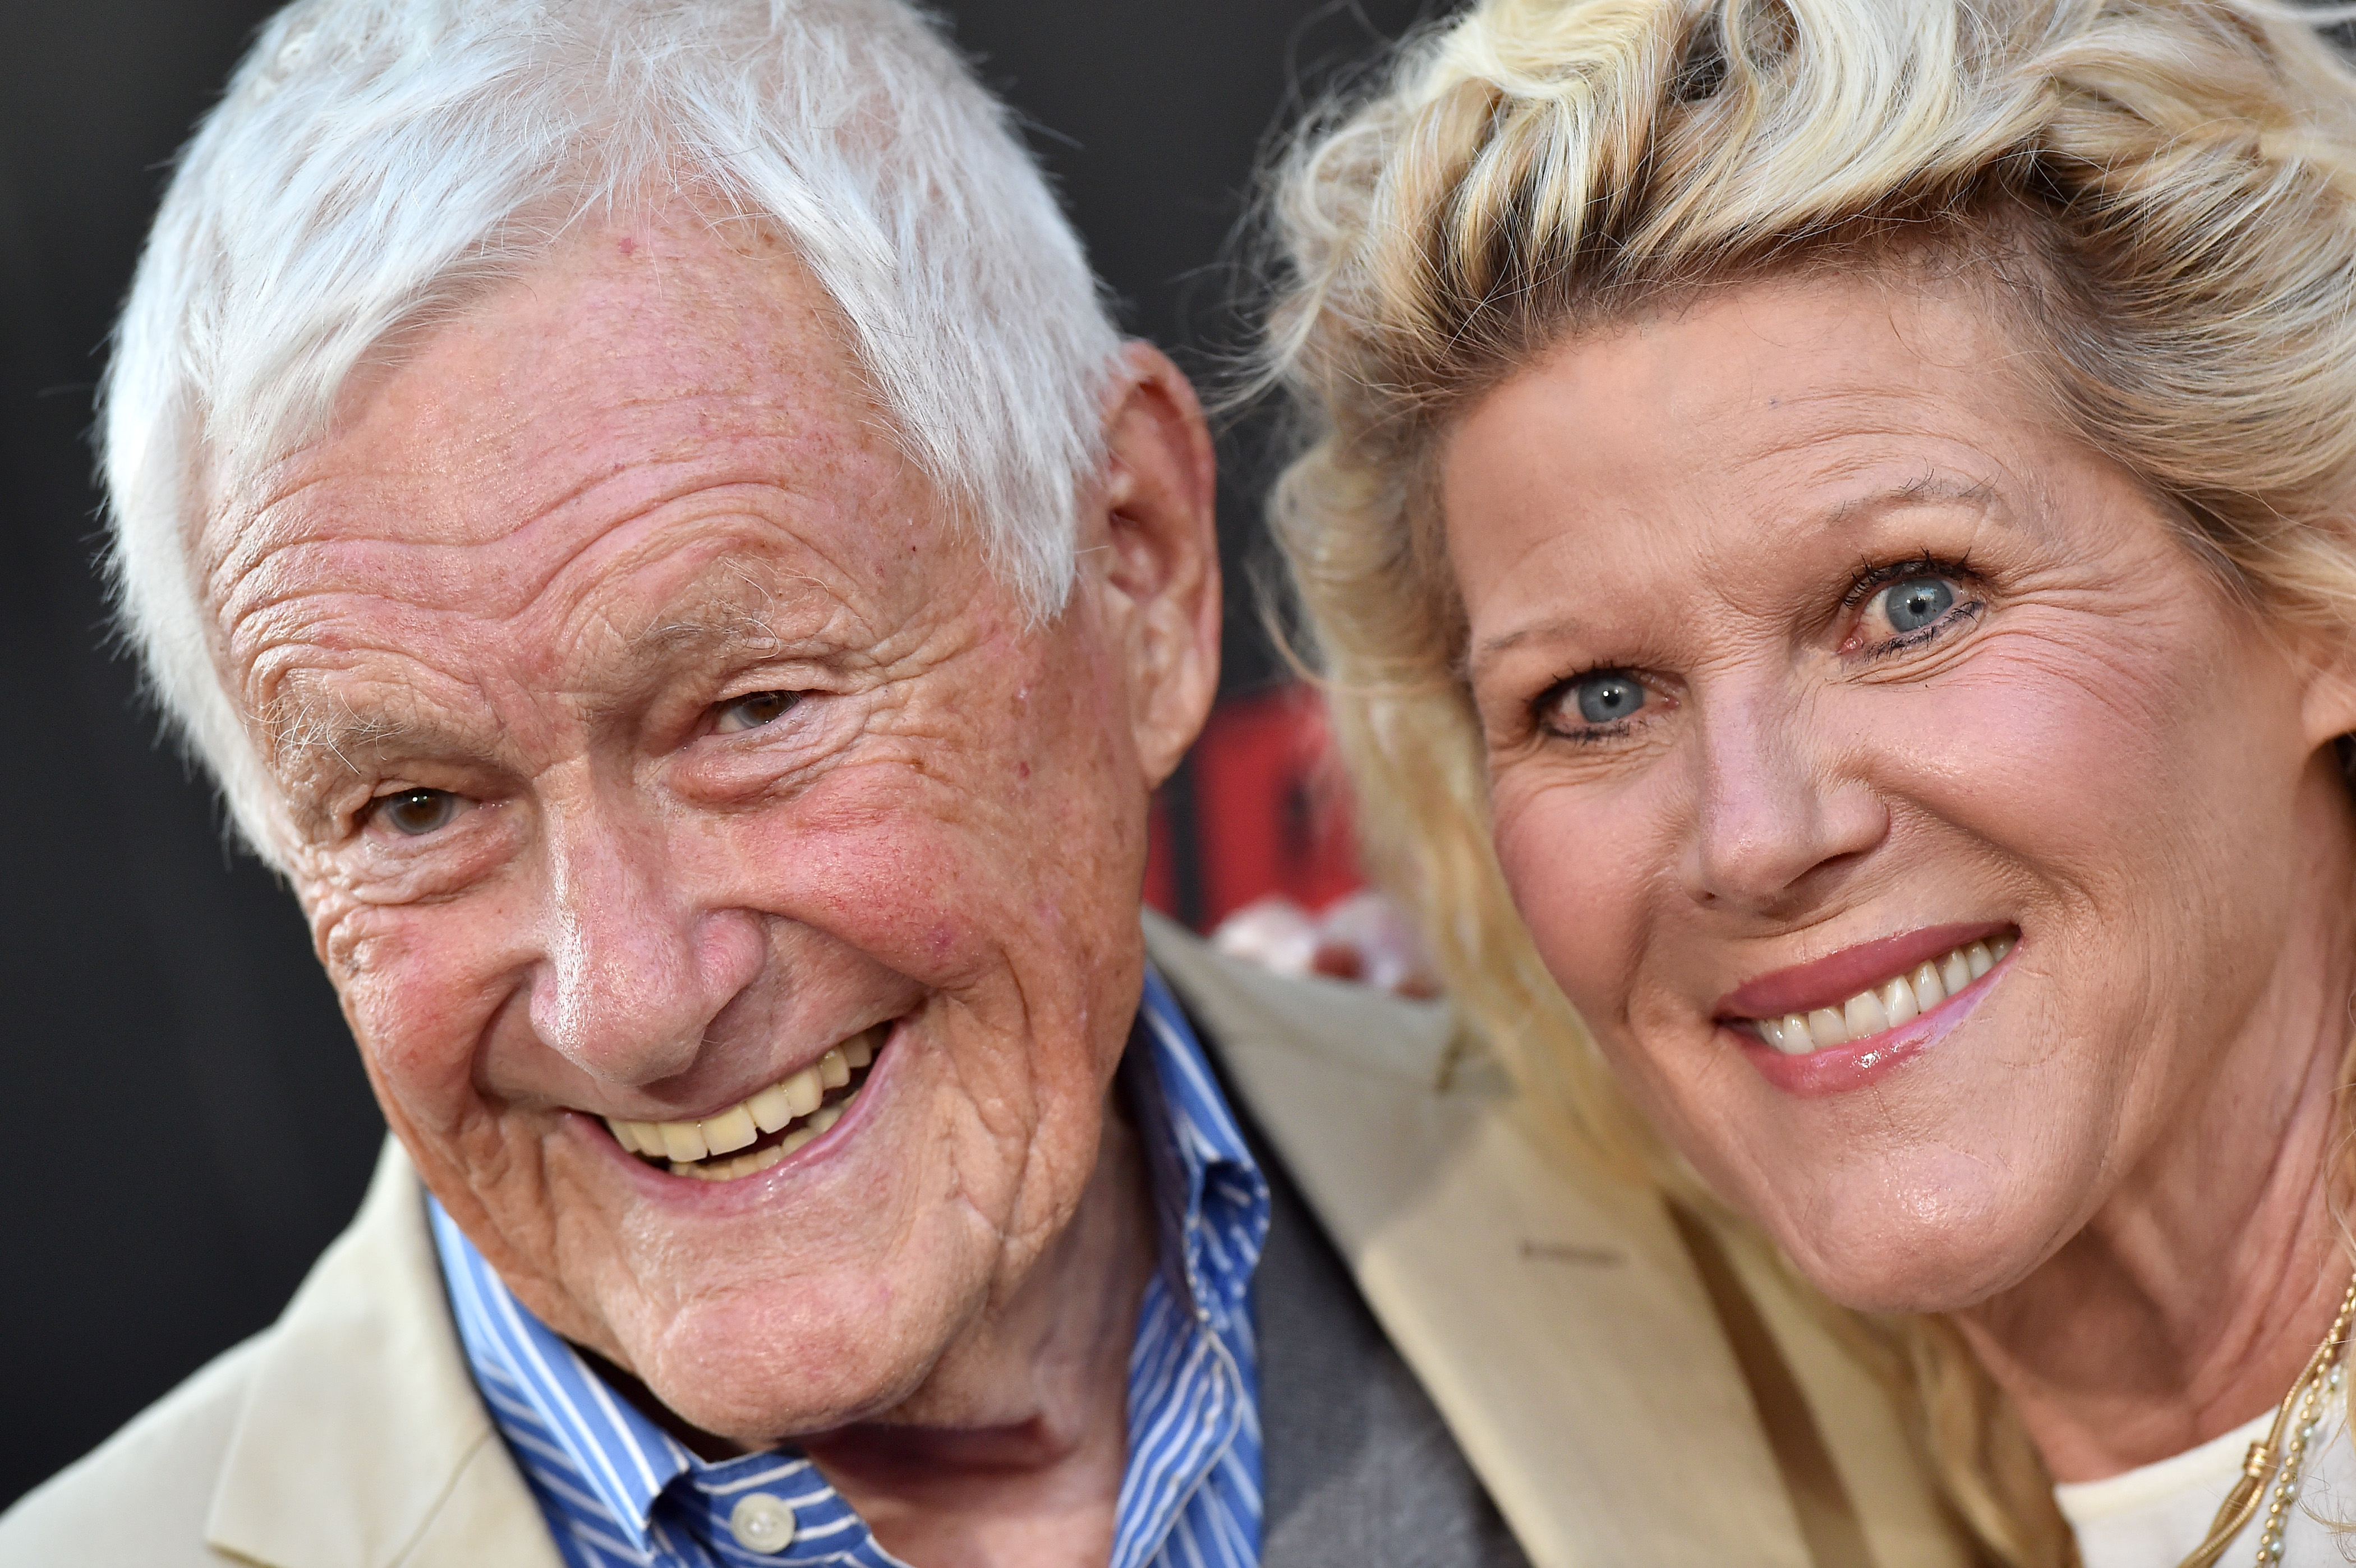 Orson Bean and Alley Mills at the premiere of "The Equalizer 2" on July 17, 2018, in Hollywood, California | Source: Getty Images